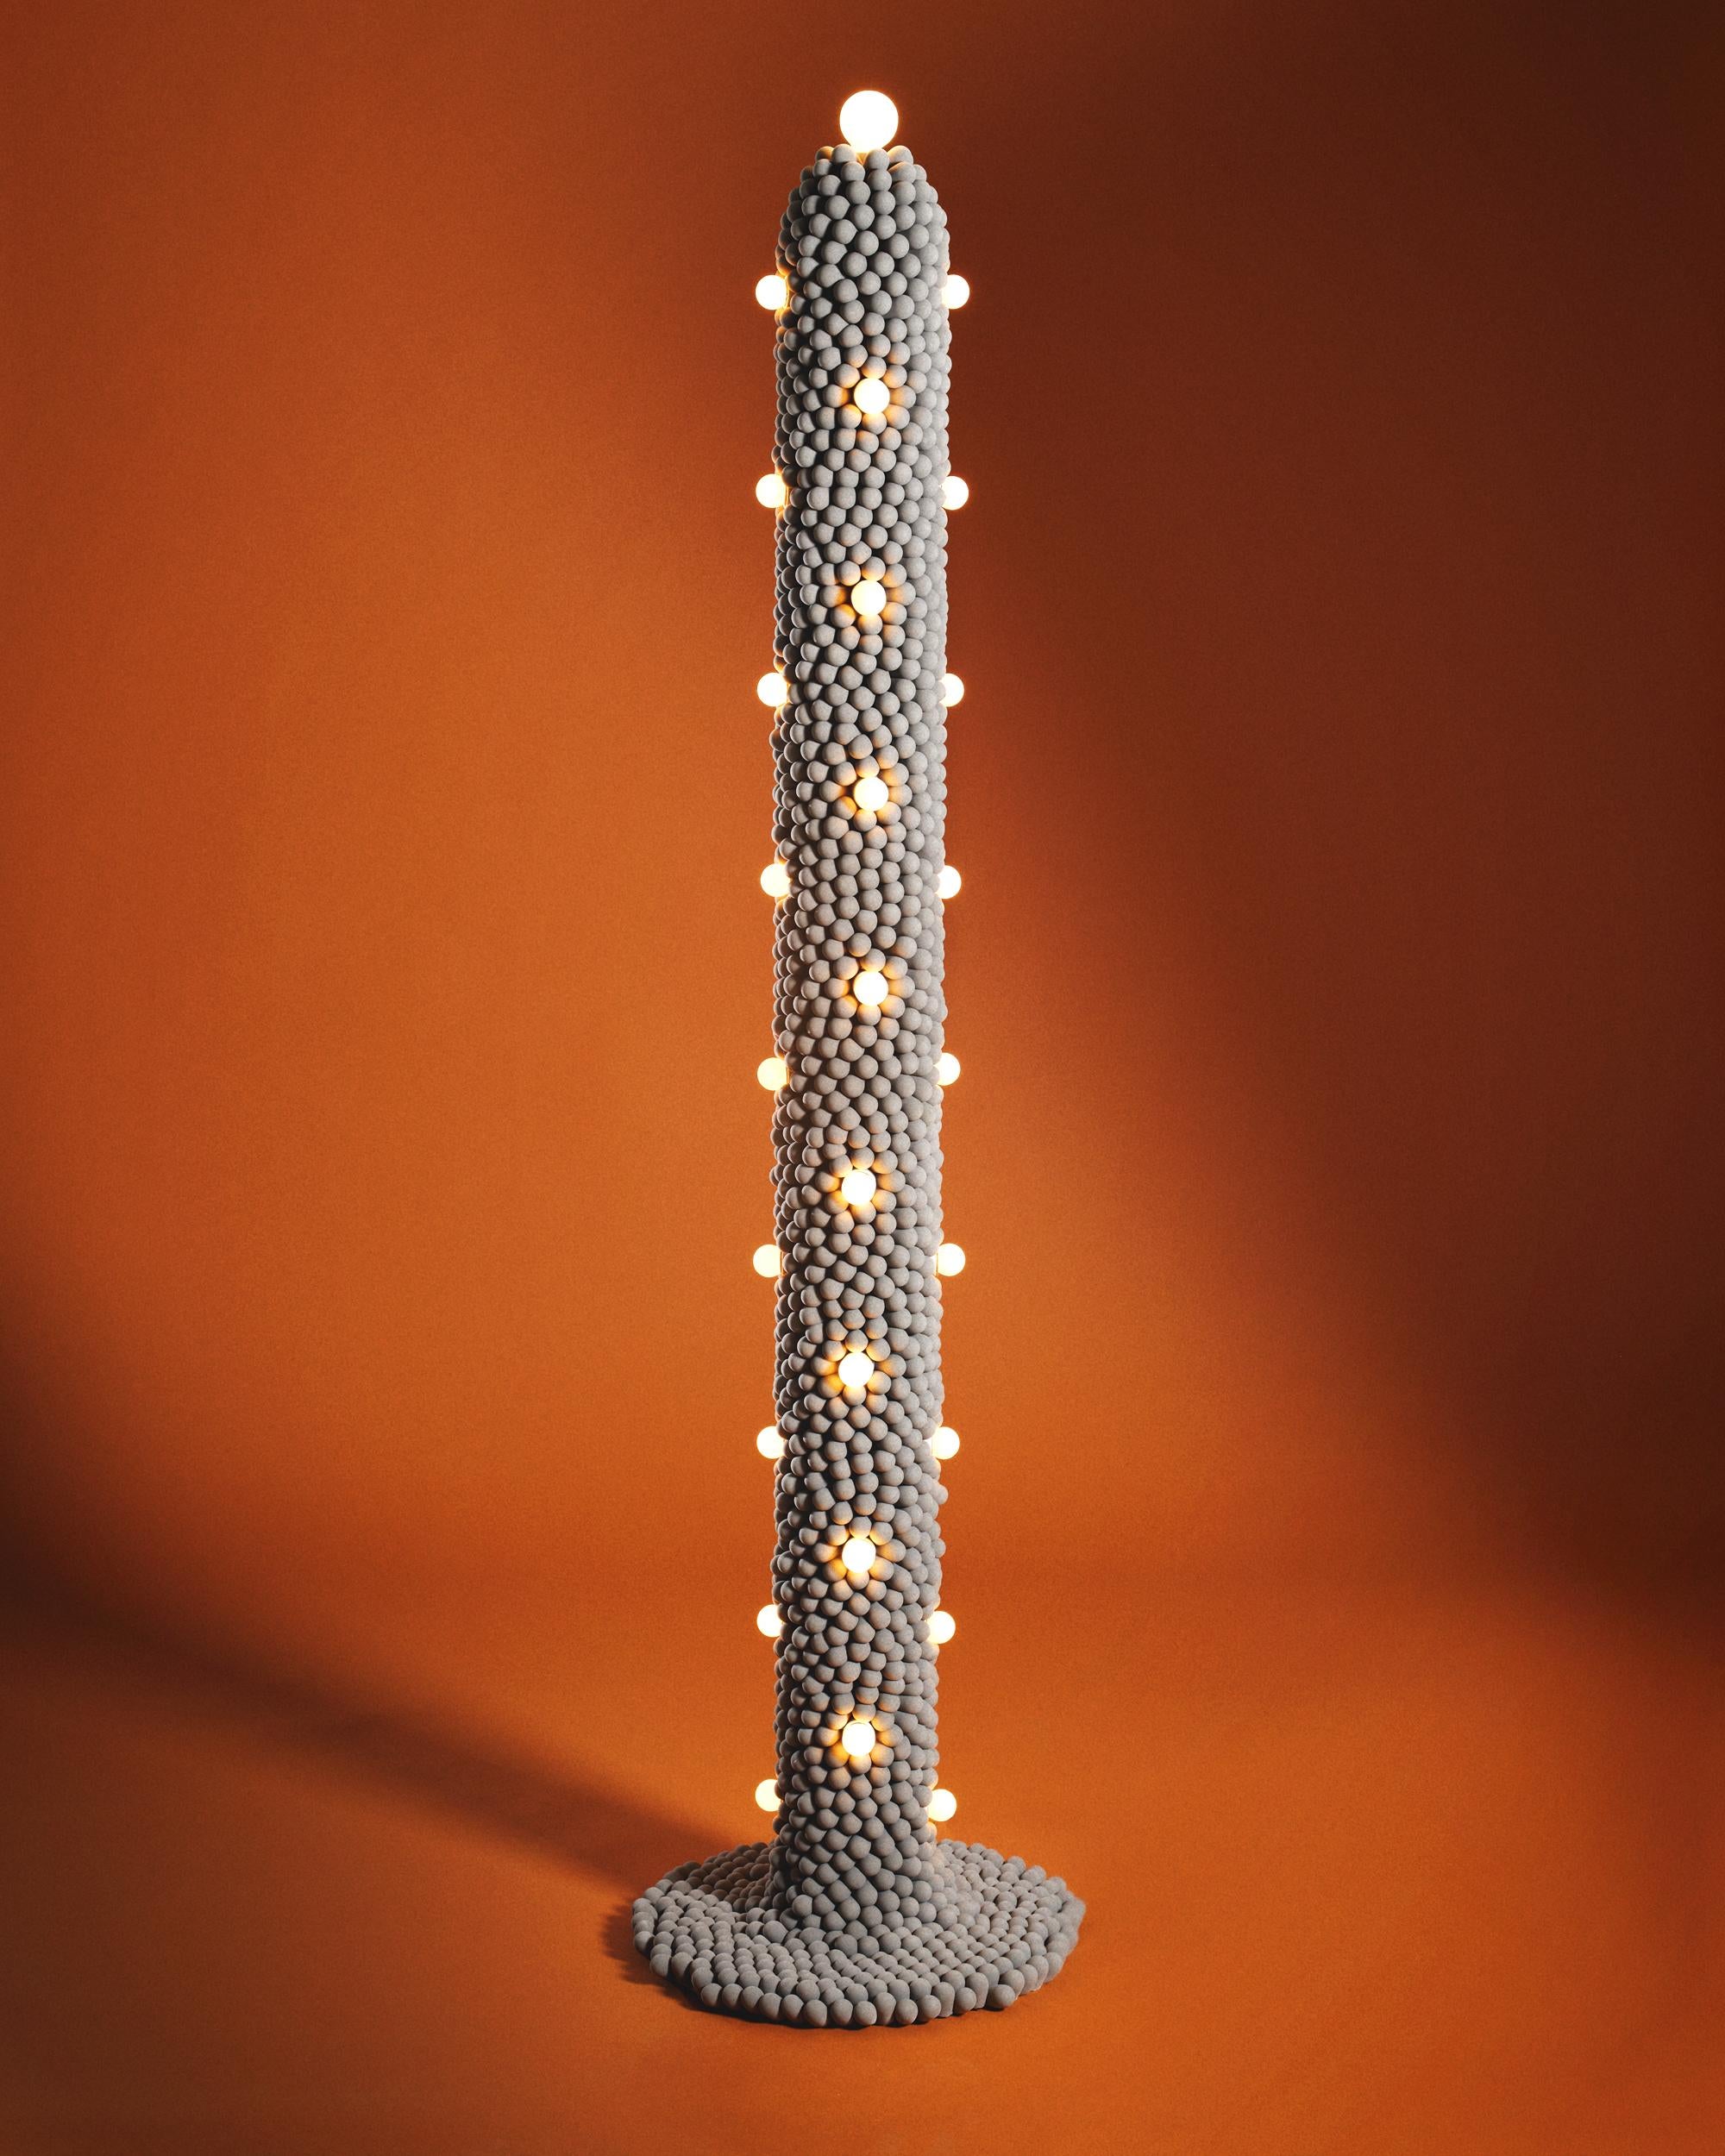 This lamp is made out of cast manufactured cast foam numbs, that are hand tacked to a metal frame. It is part of a new foam collection by Joseph Algieri that uses cast manufactured foam in the style of foam numb pieces from the artist. The piece is